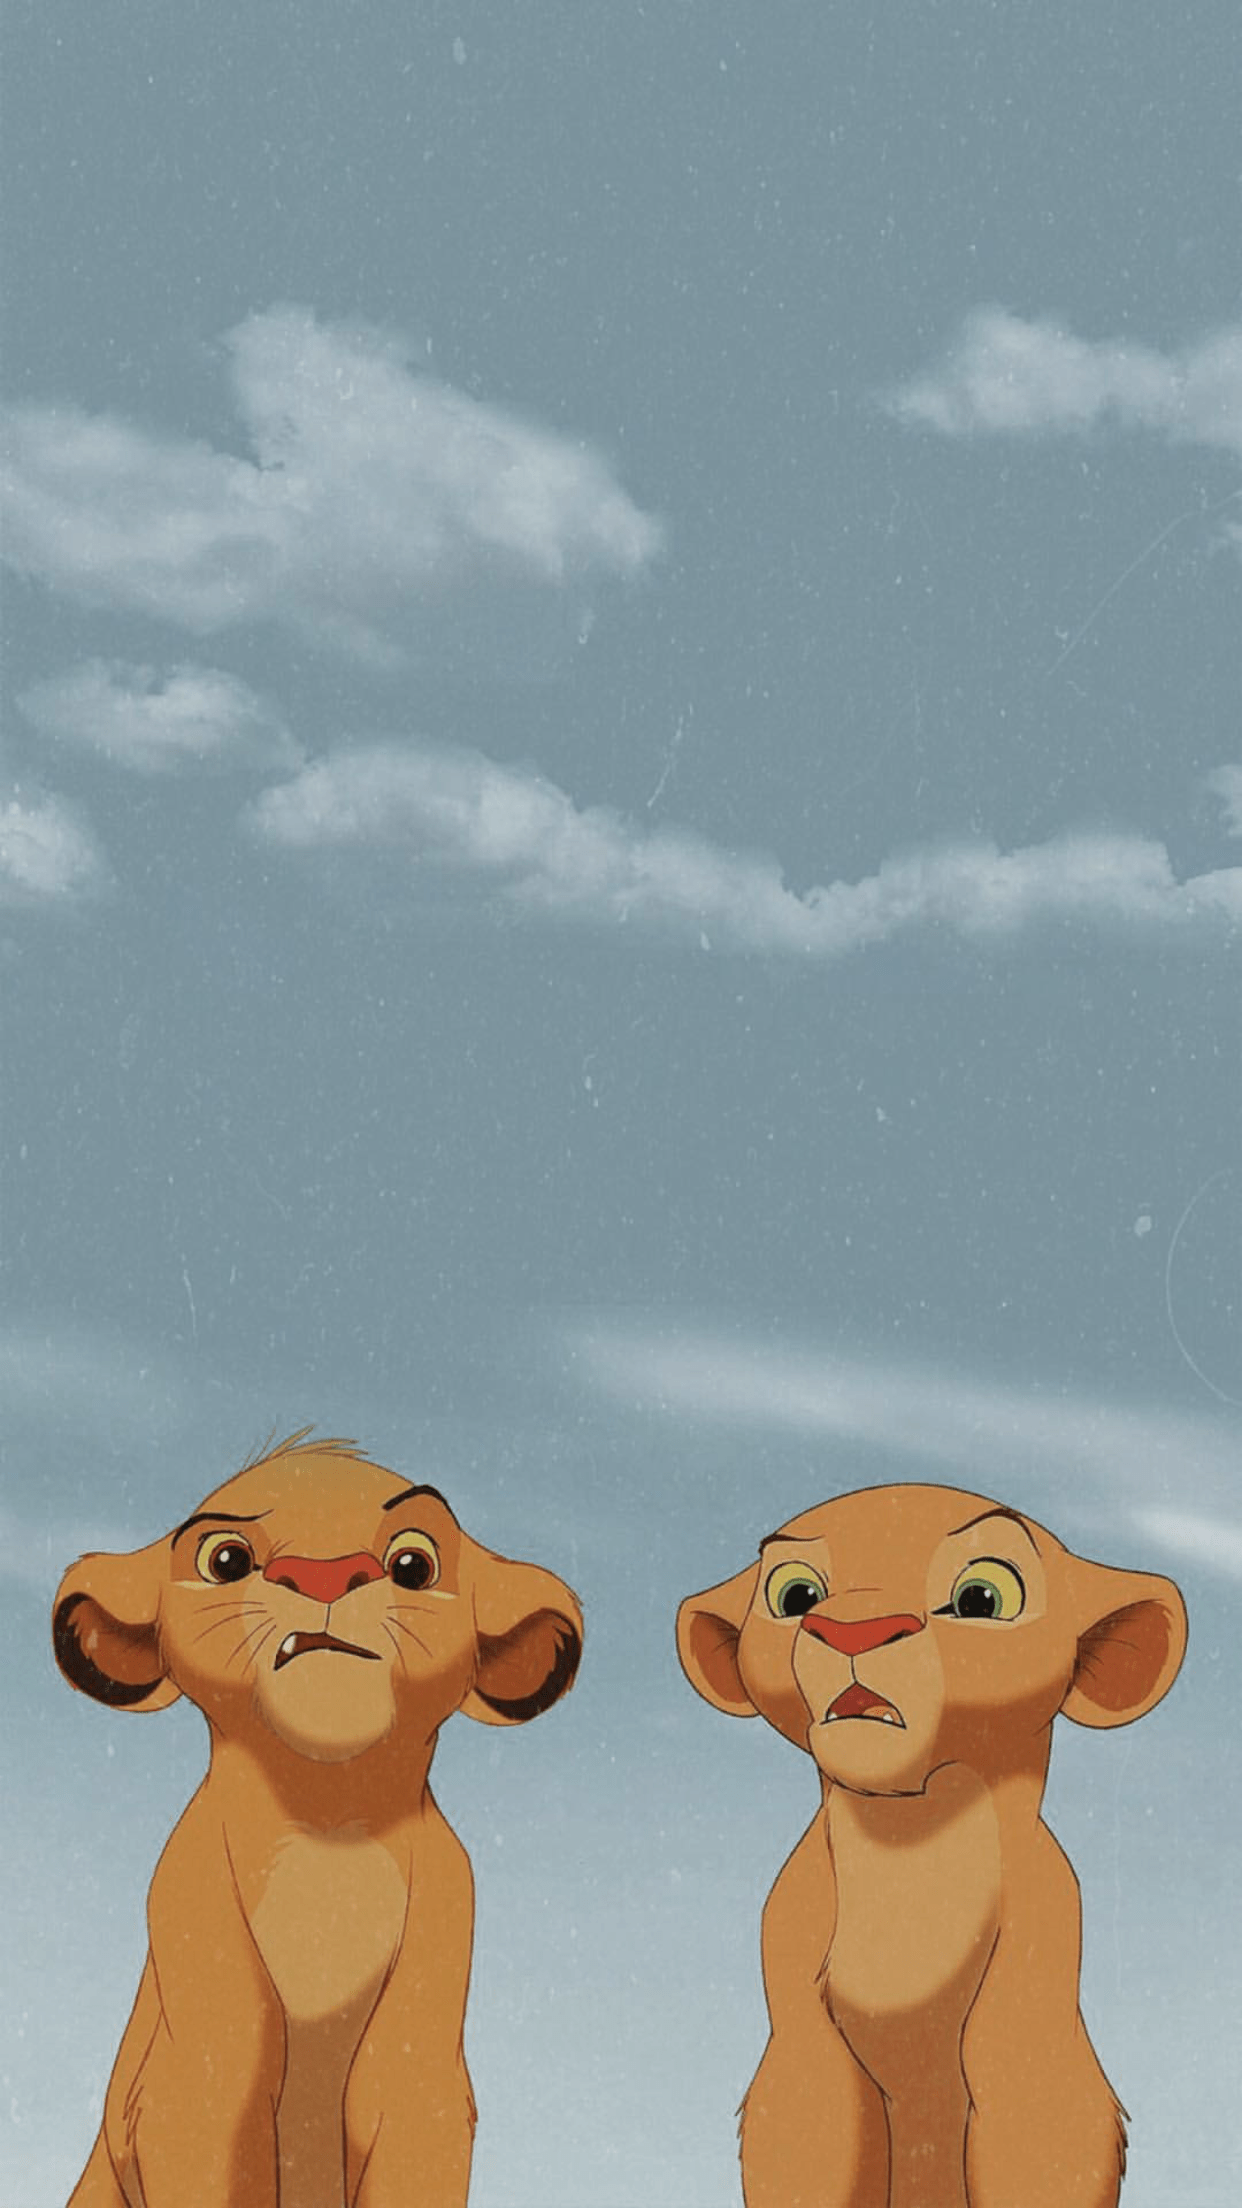 A couple of lion cubs are standing together - The Lion King